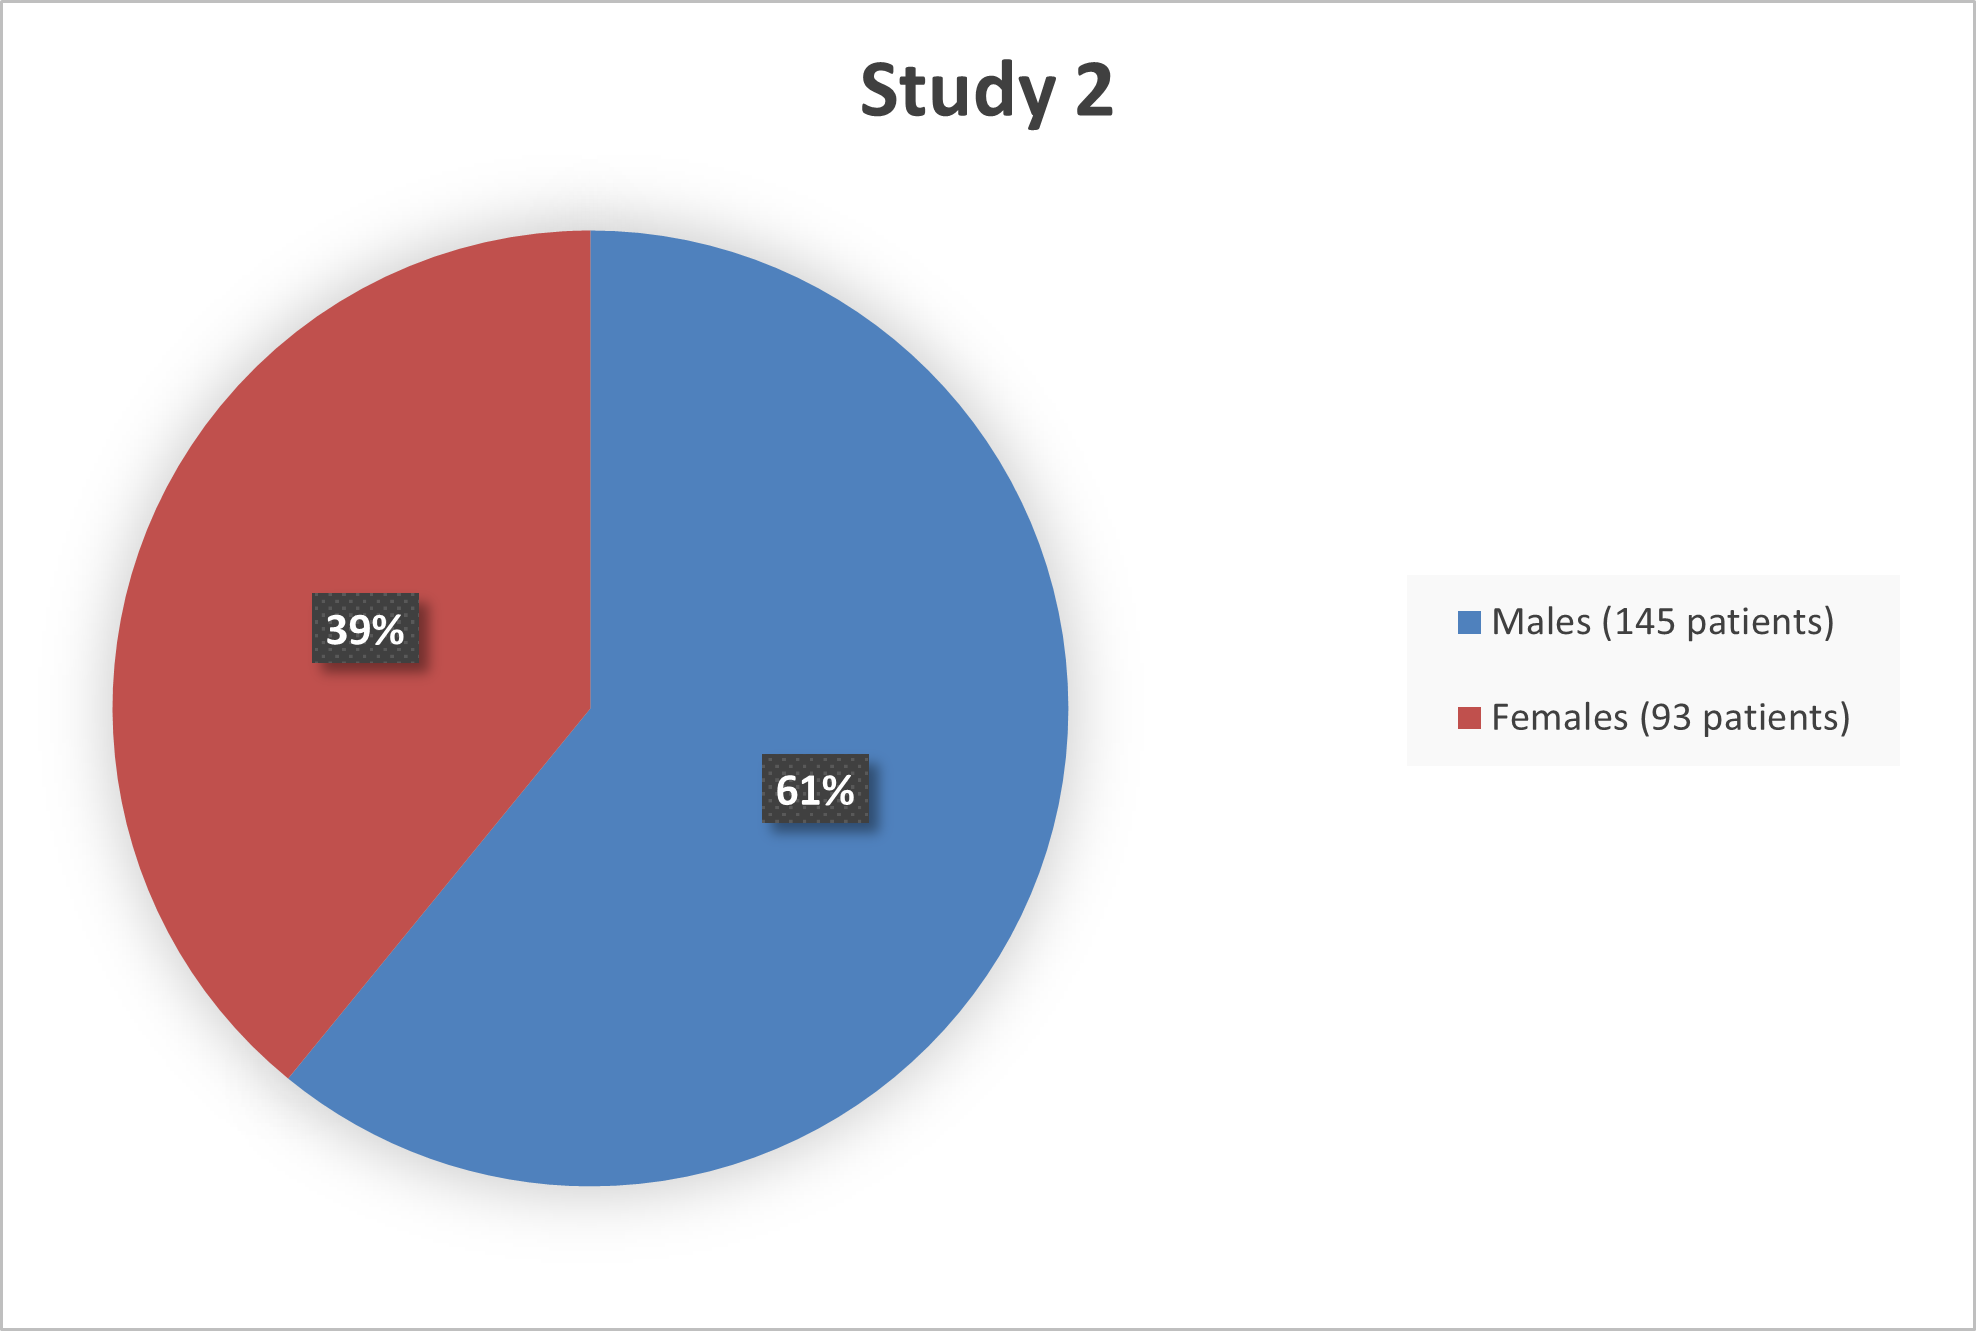 Figures 2 summarize the percentage of patients by sex that were enrolled in trials used to evaluate the efficacy and safety of AZSTARYS